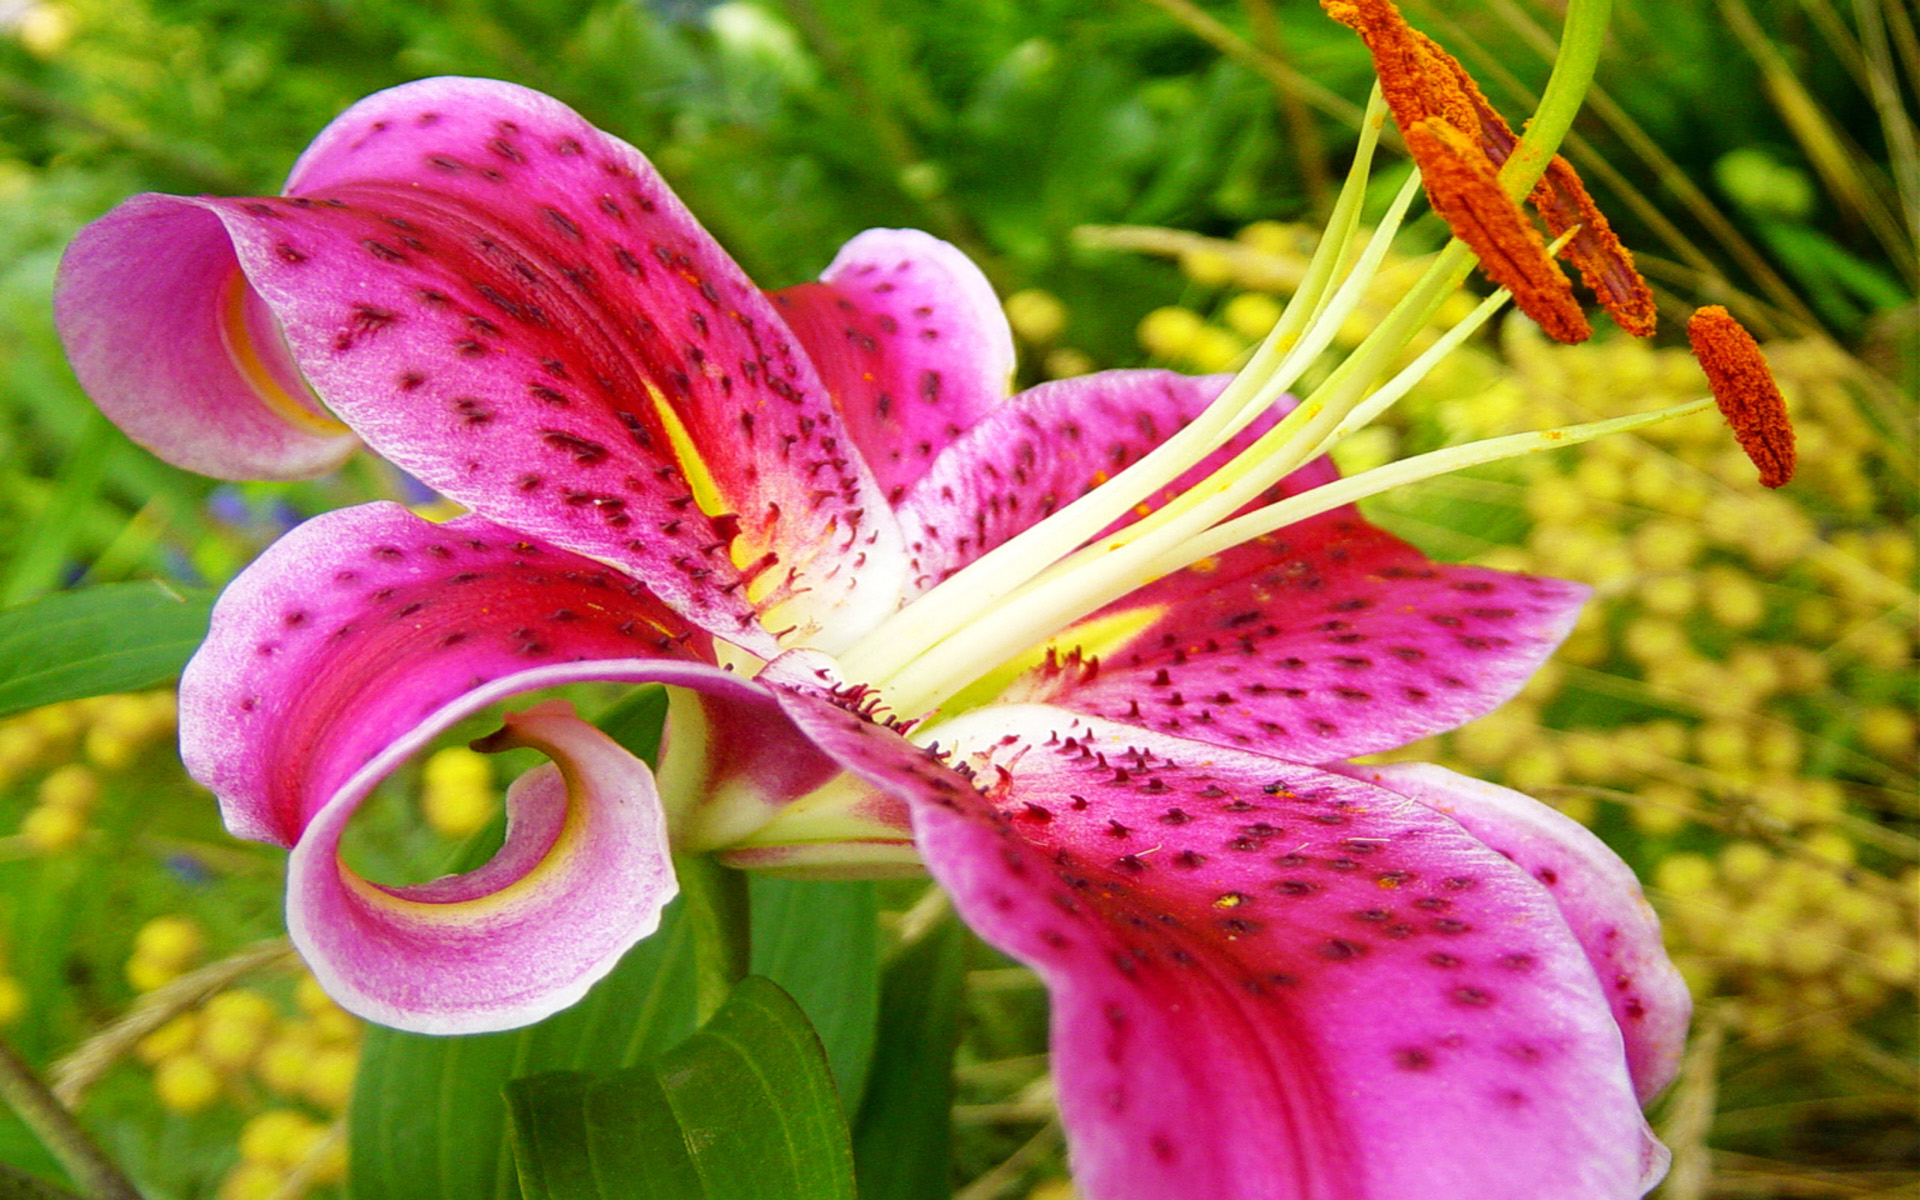 1920x1200 Rose Stargazer Lily Is A Hybrid Lily Of The Oriental Lilies Known For Their Fragrant Perfume :